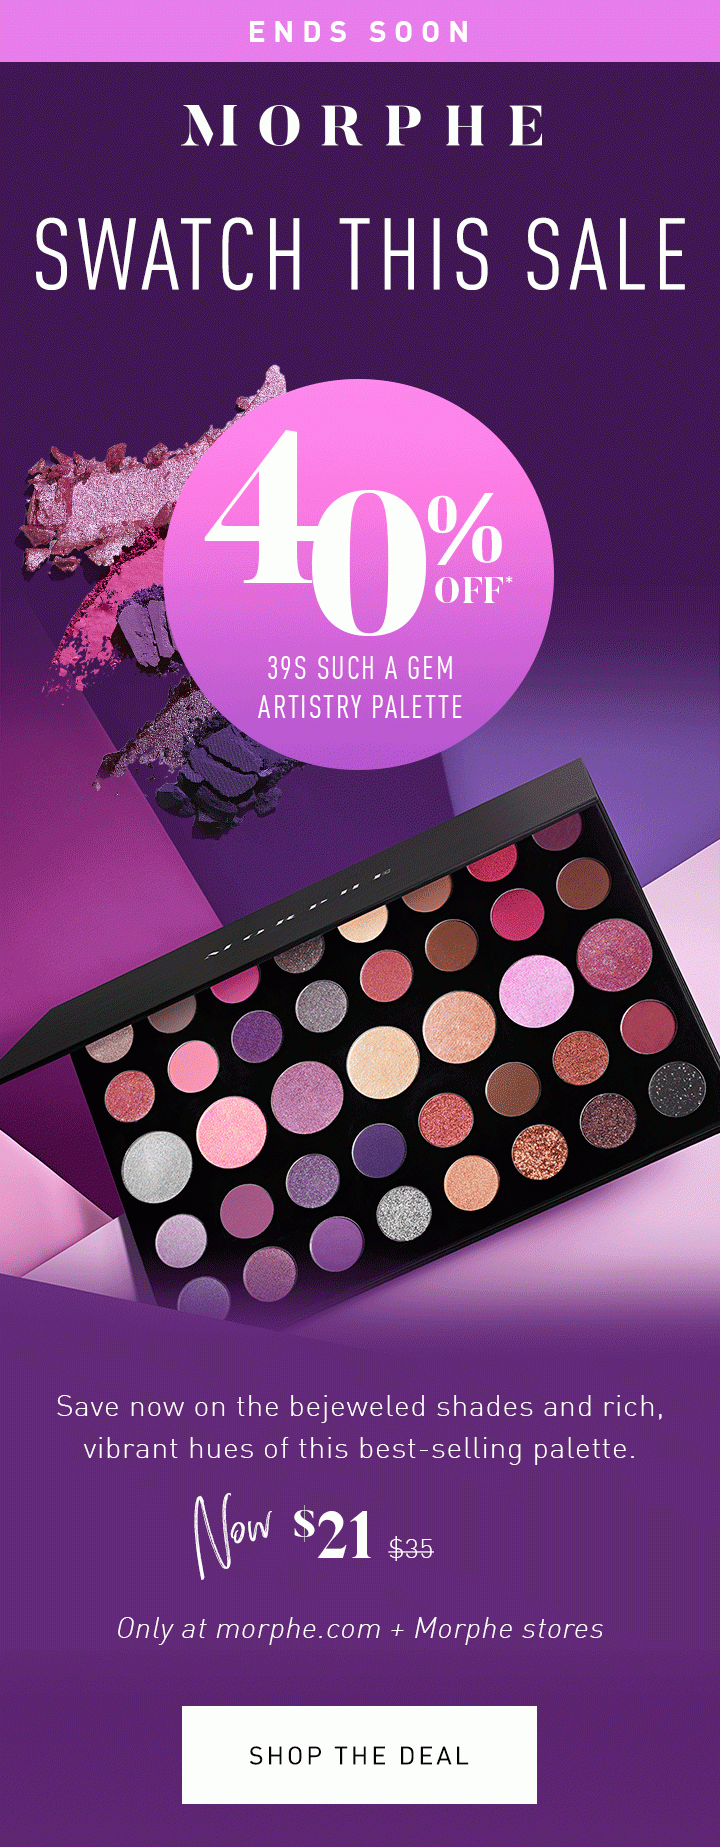 MORPHE ENDS SOON SWATCH THIS SALE 40% OFF* 39S SUCH A GEM ARTISTRY PALETTE Save now on the bejeweled shades and rich, vibrant hues of this best-selling palette. NOW $21 $35 Only at morphe.com + Morphe stores SHOP THE DEAL 